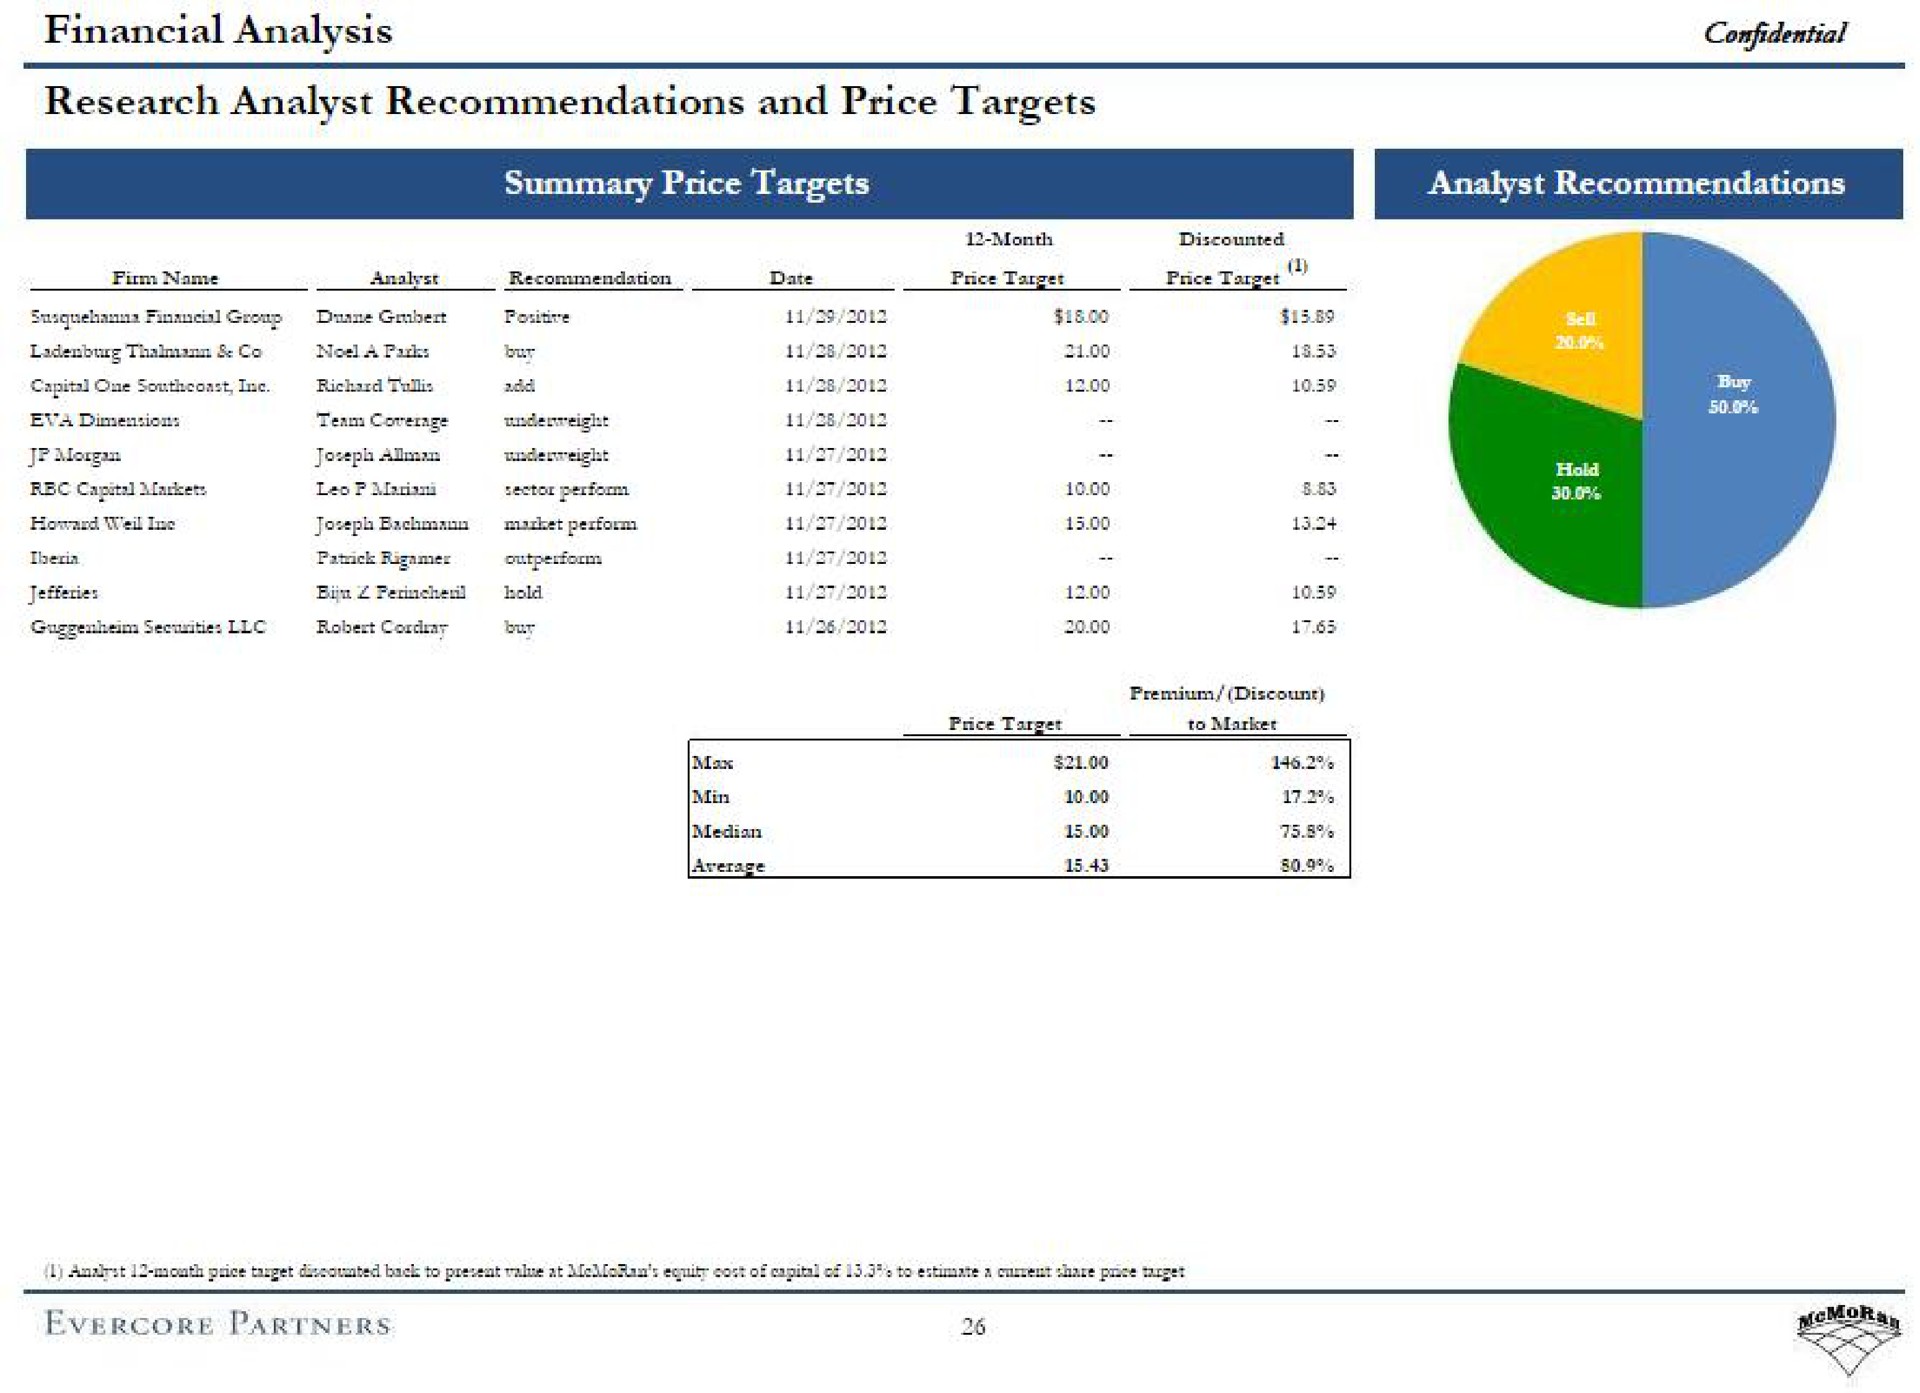 summary price targets research analyst recommendations and price targets financial analysis confidential | Evercore